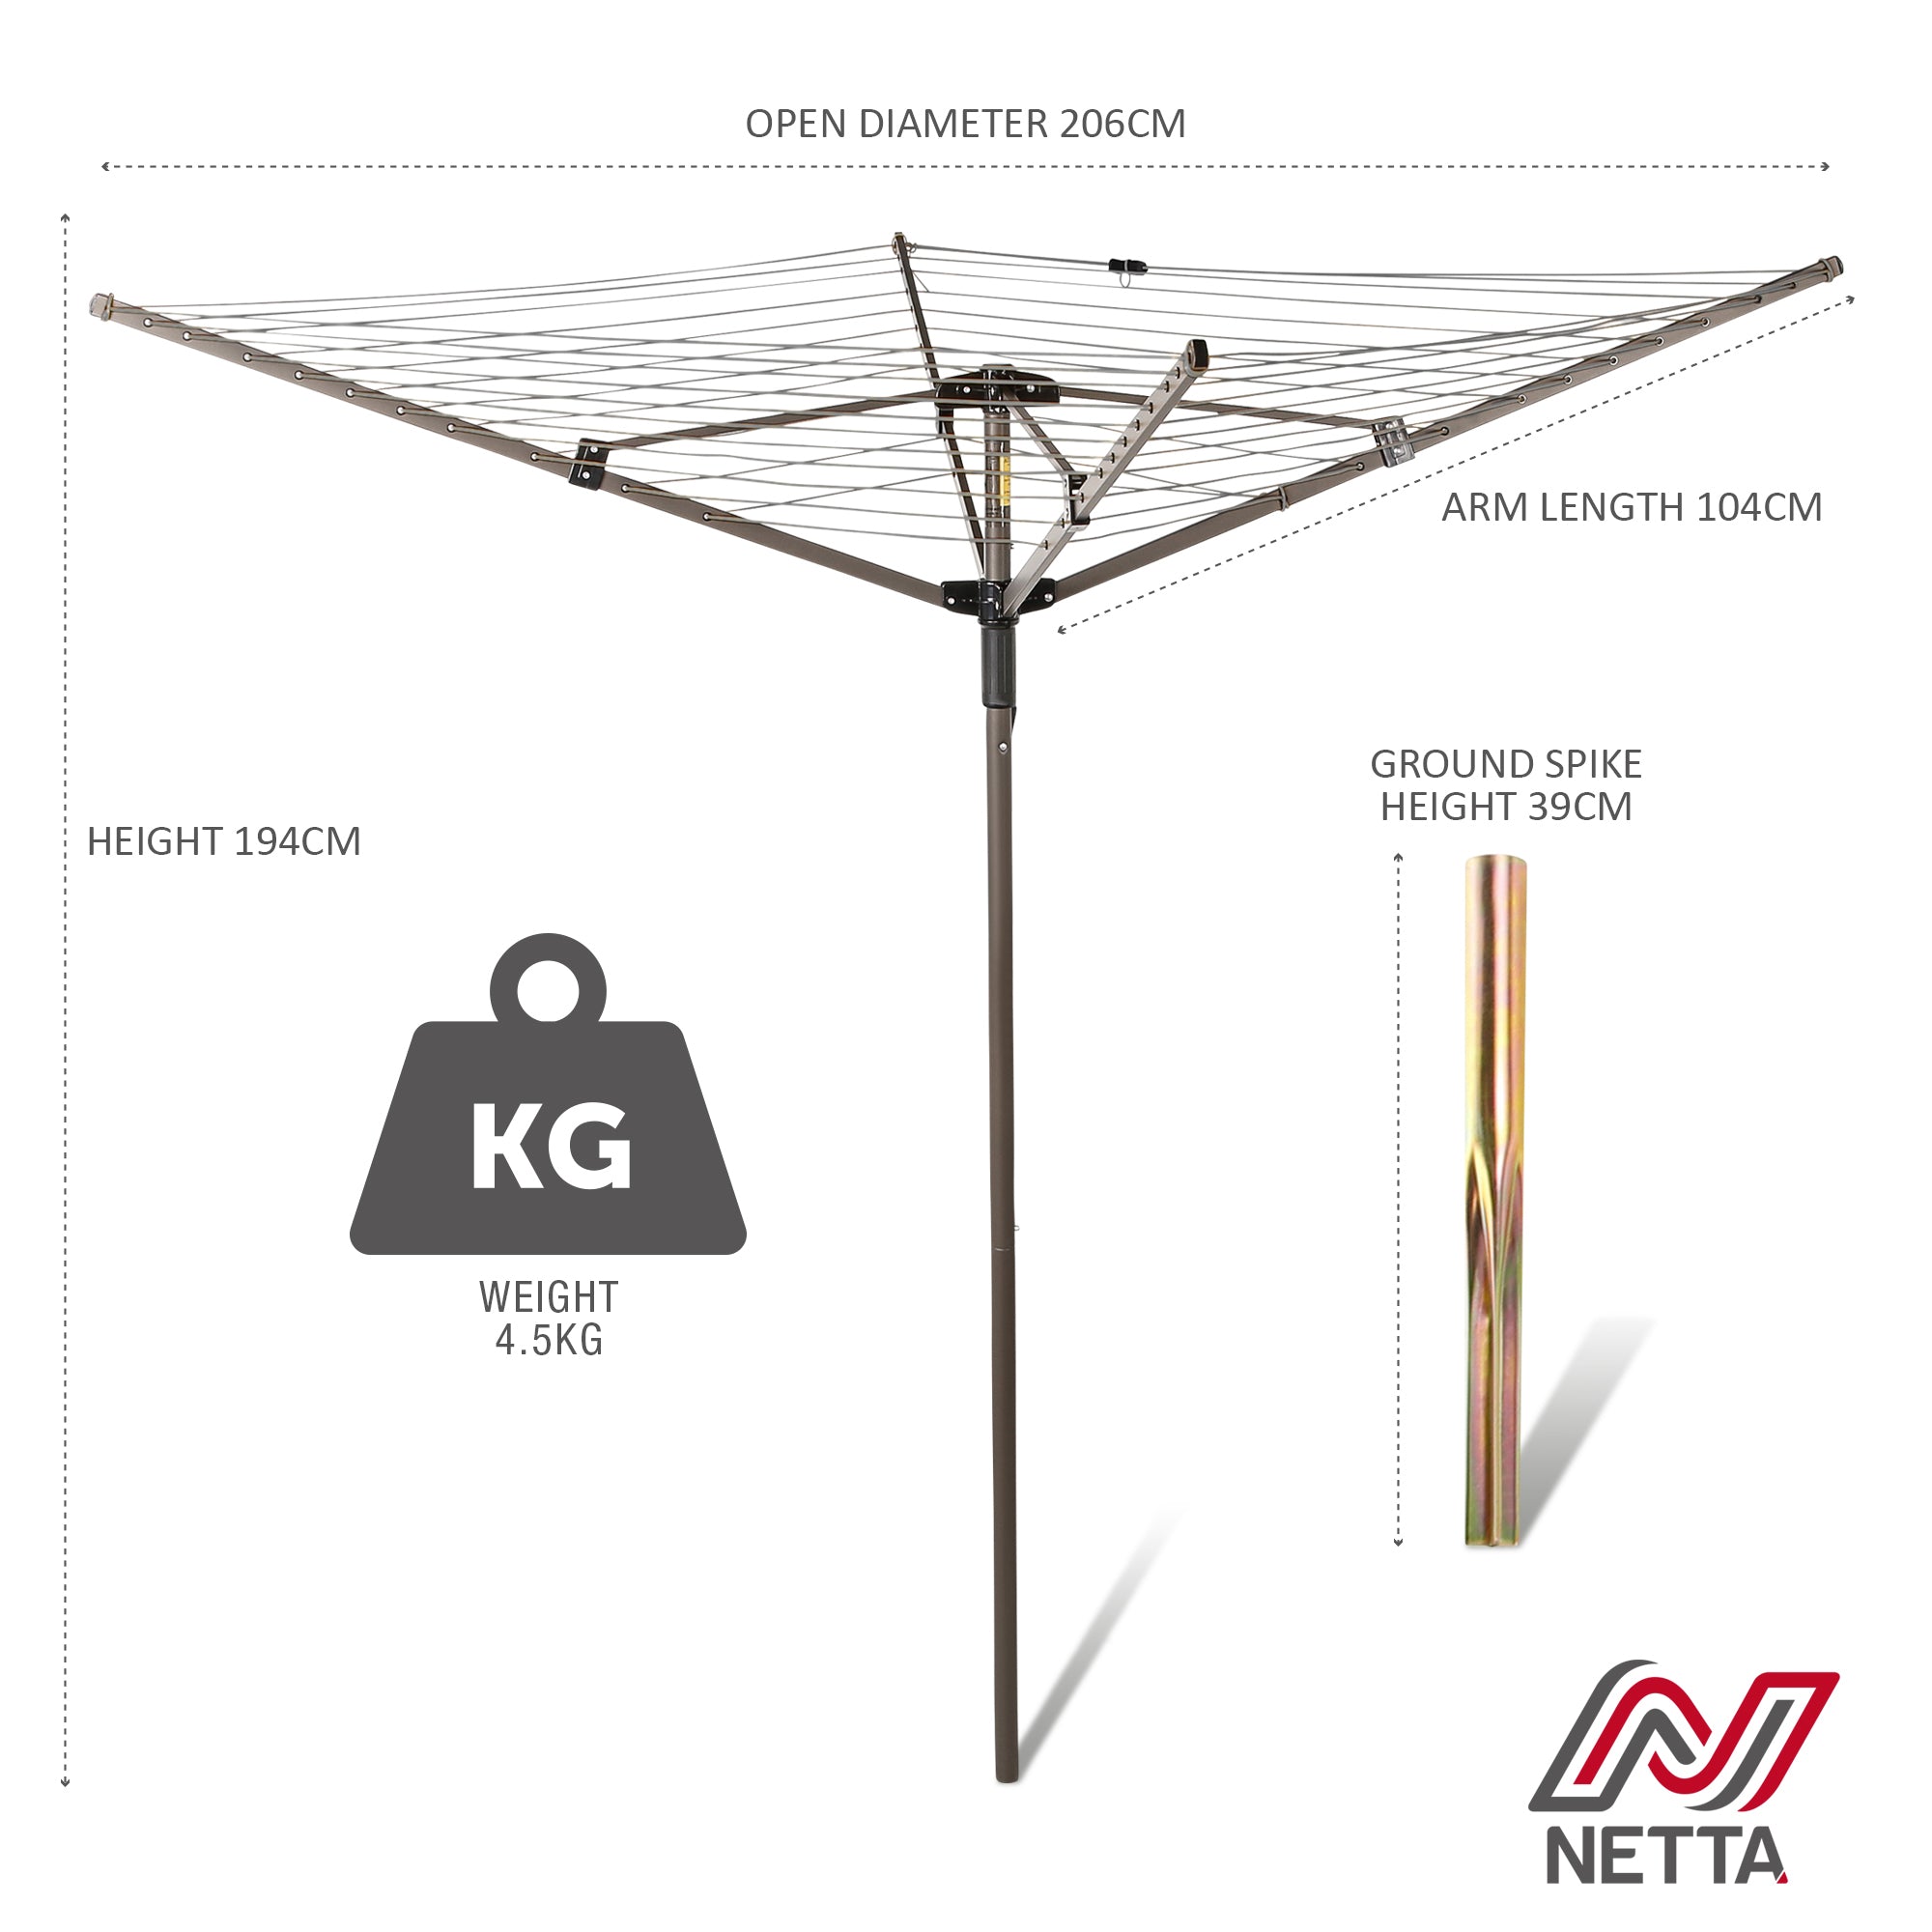 NETTA 45M Rotary Washing Line Airer - Cover And Ground Spike Included